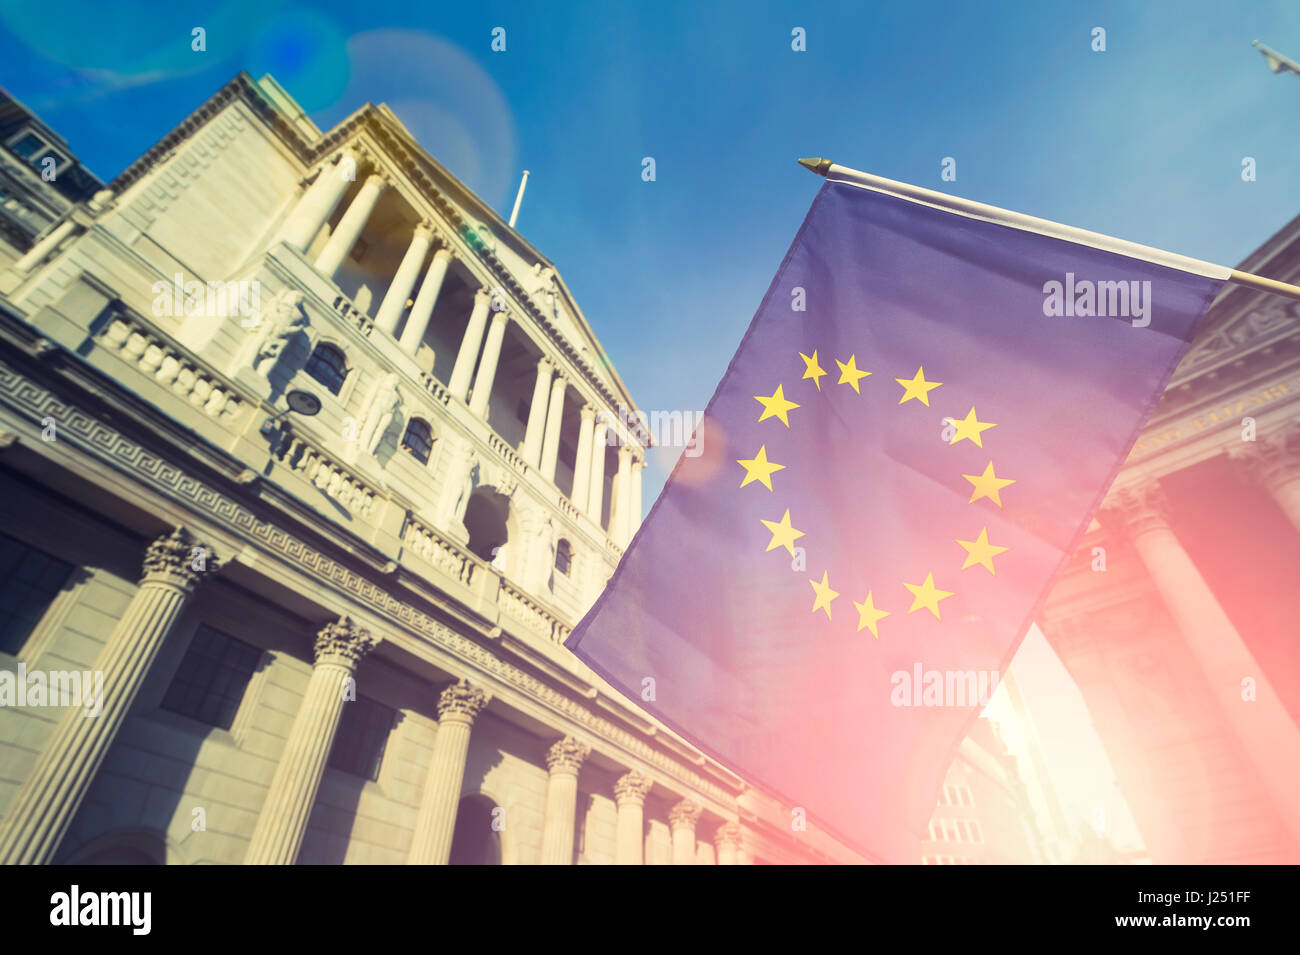 EU European Union flag flying in front of the traditional buildings in the financial capital of the City of London, UK Stock Photo